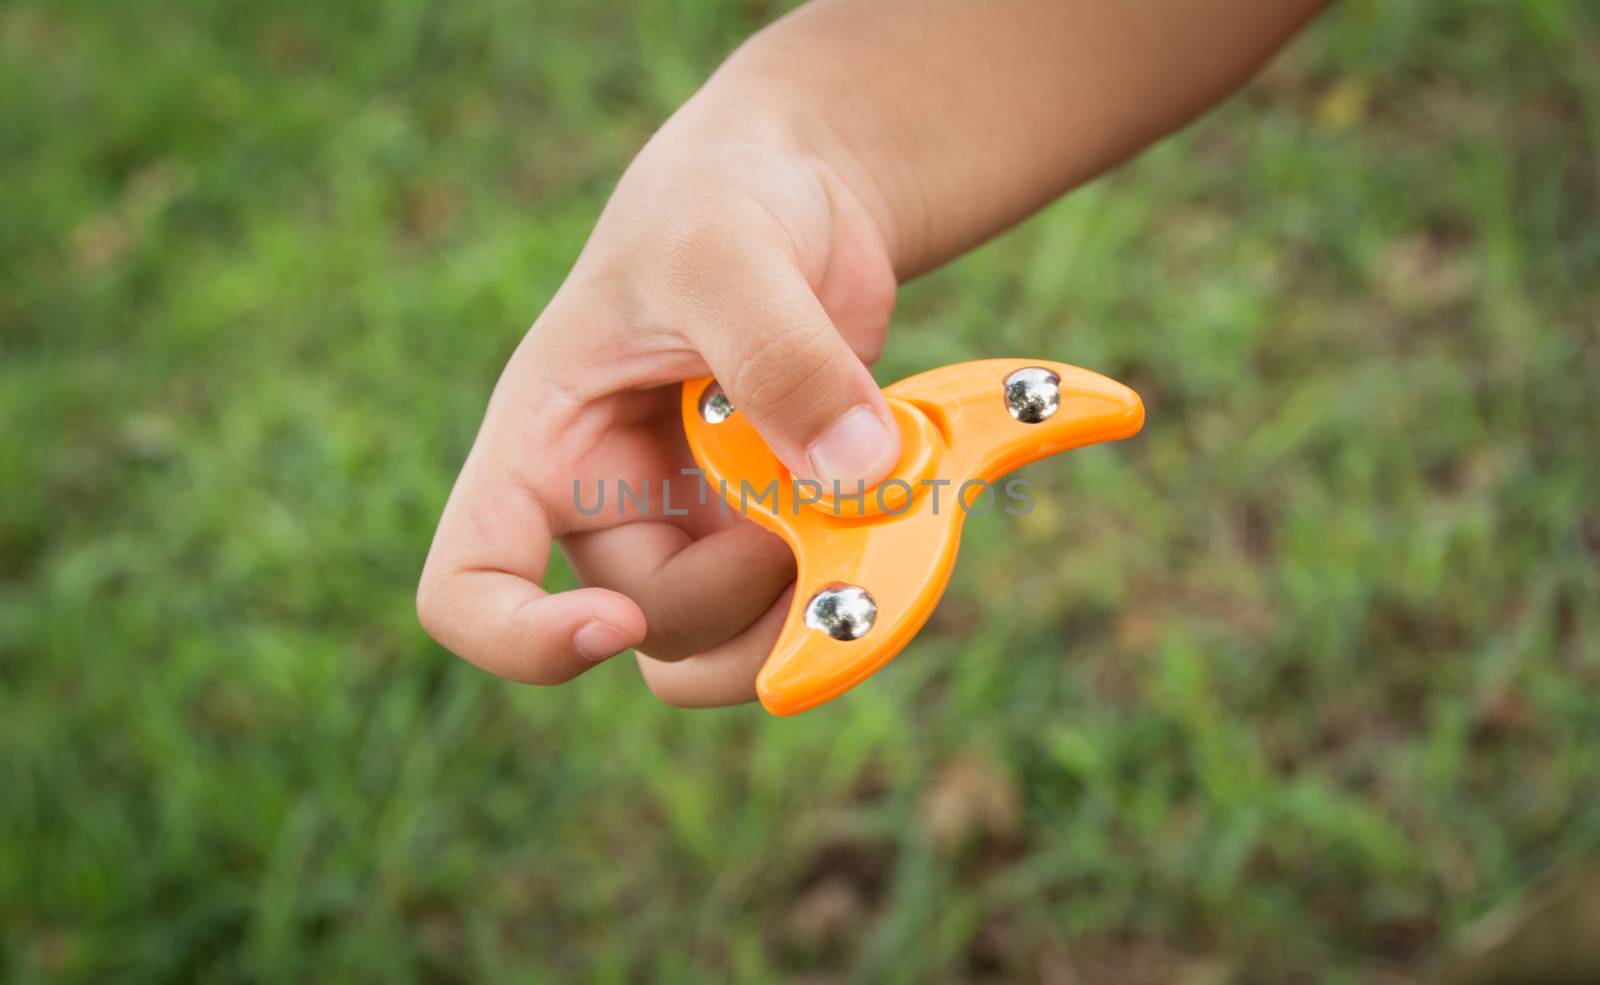 Children play with finger spinner gadget.Popular spinner device to play balance game.